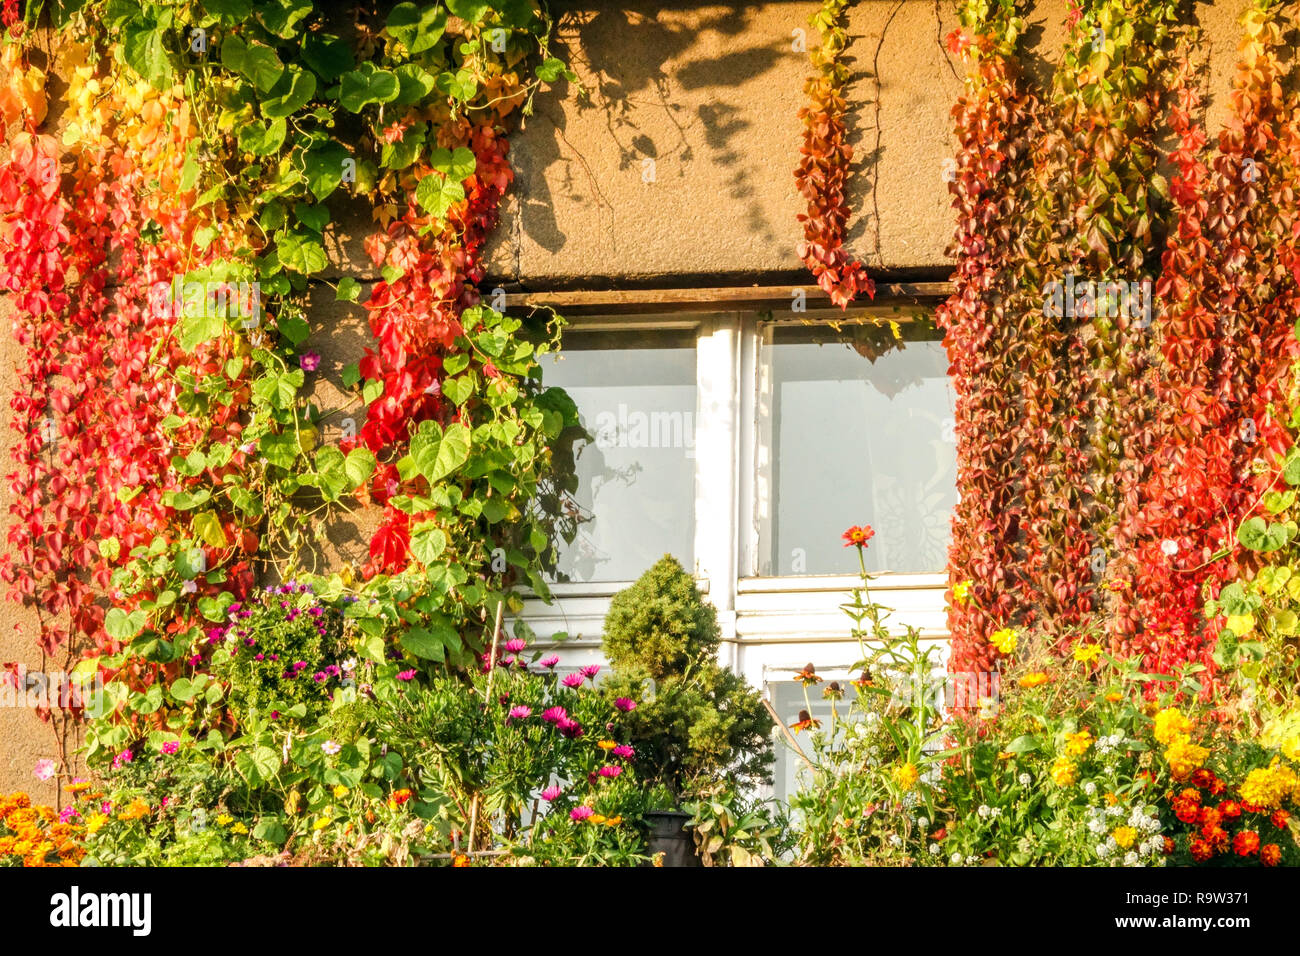 Overgrown window and colorful autumn climbing plants, Berlin Germany autumn climbers Stock Photo